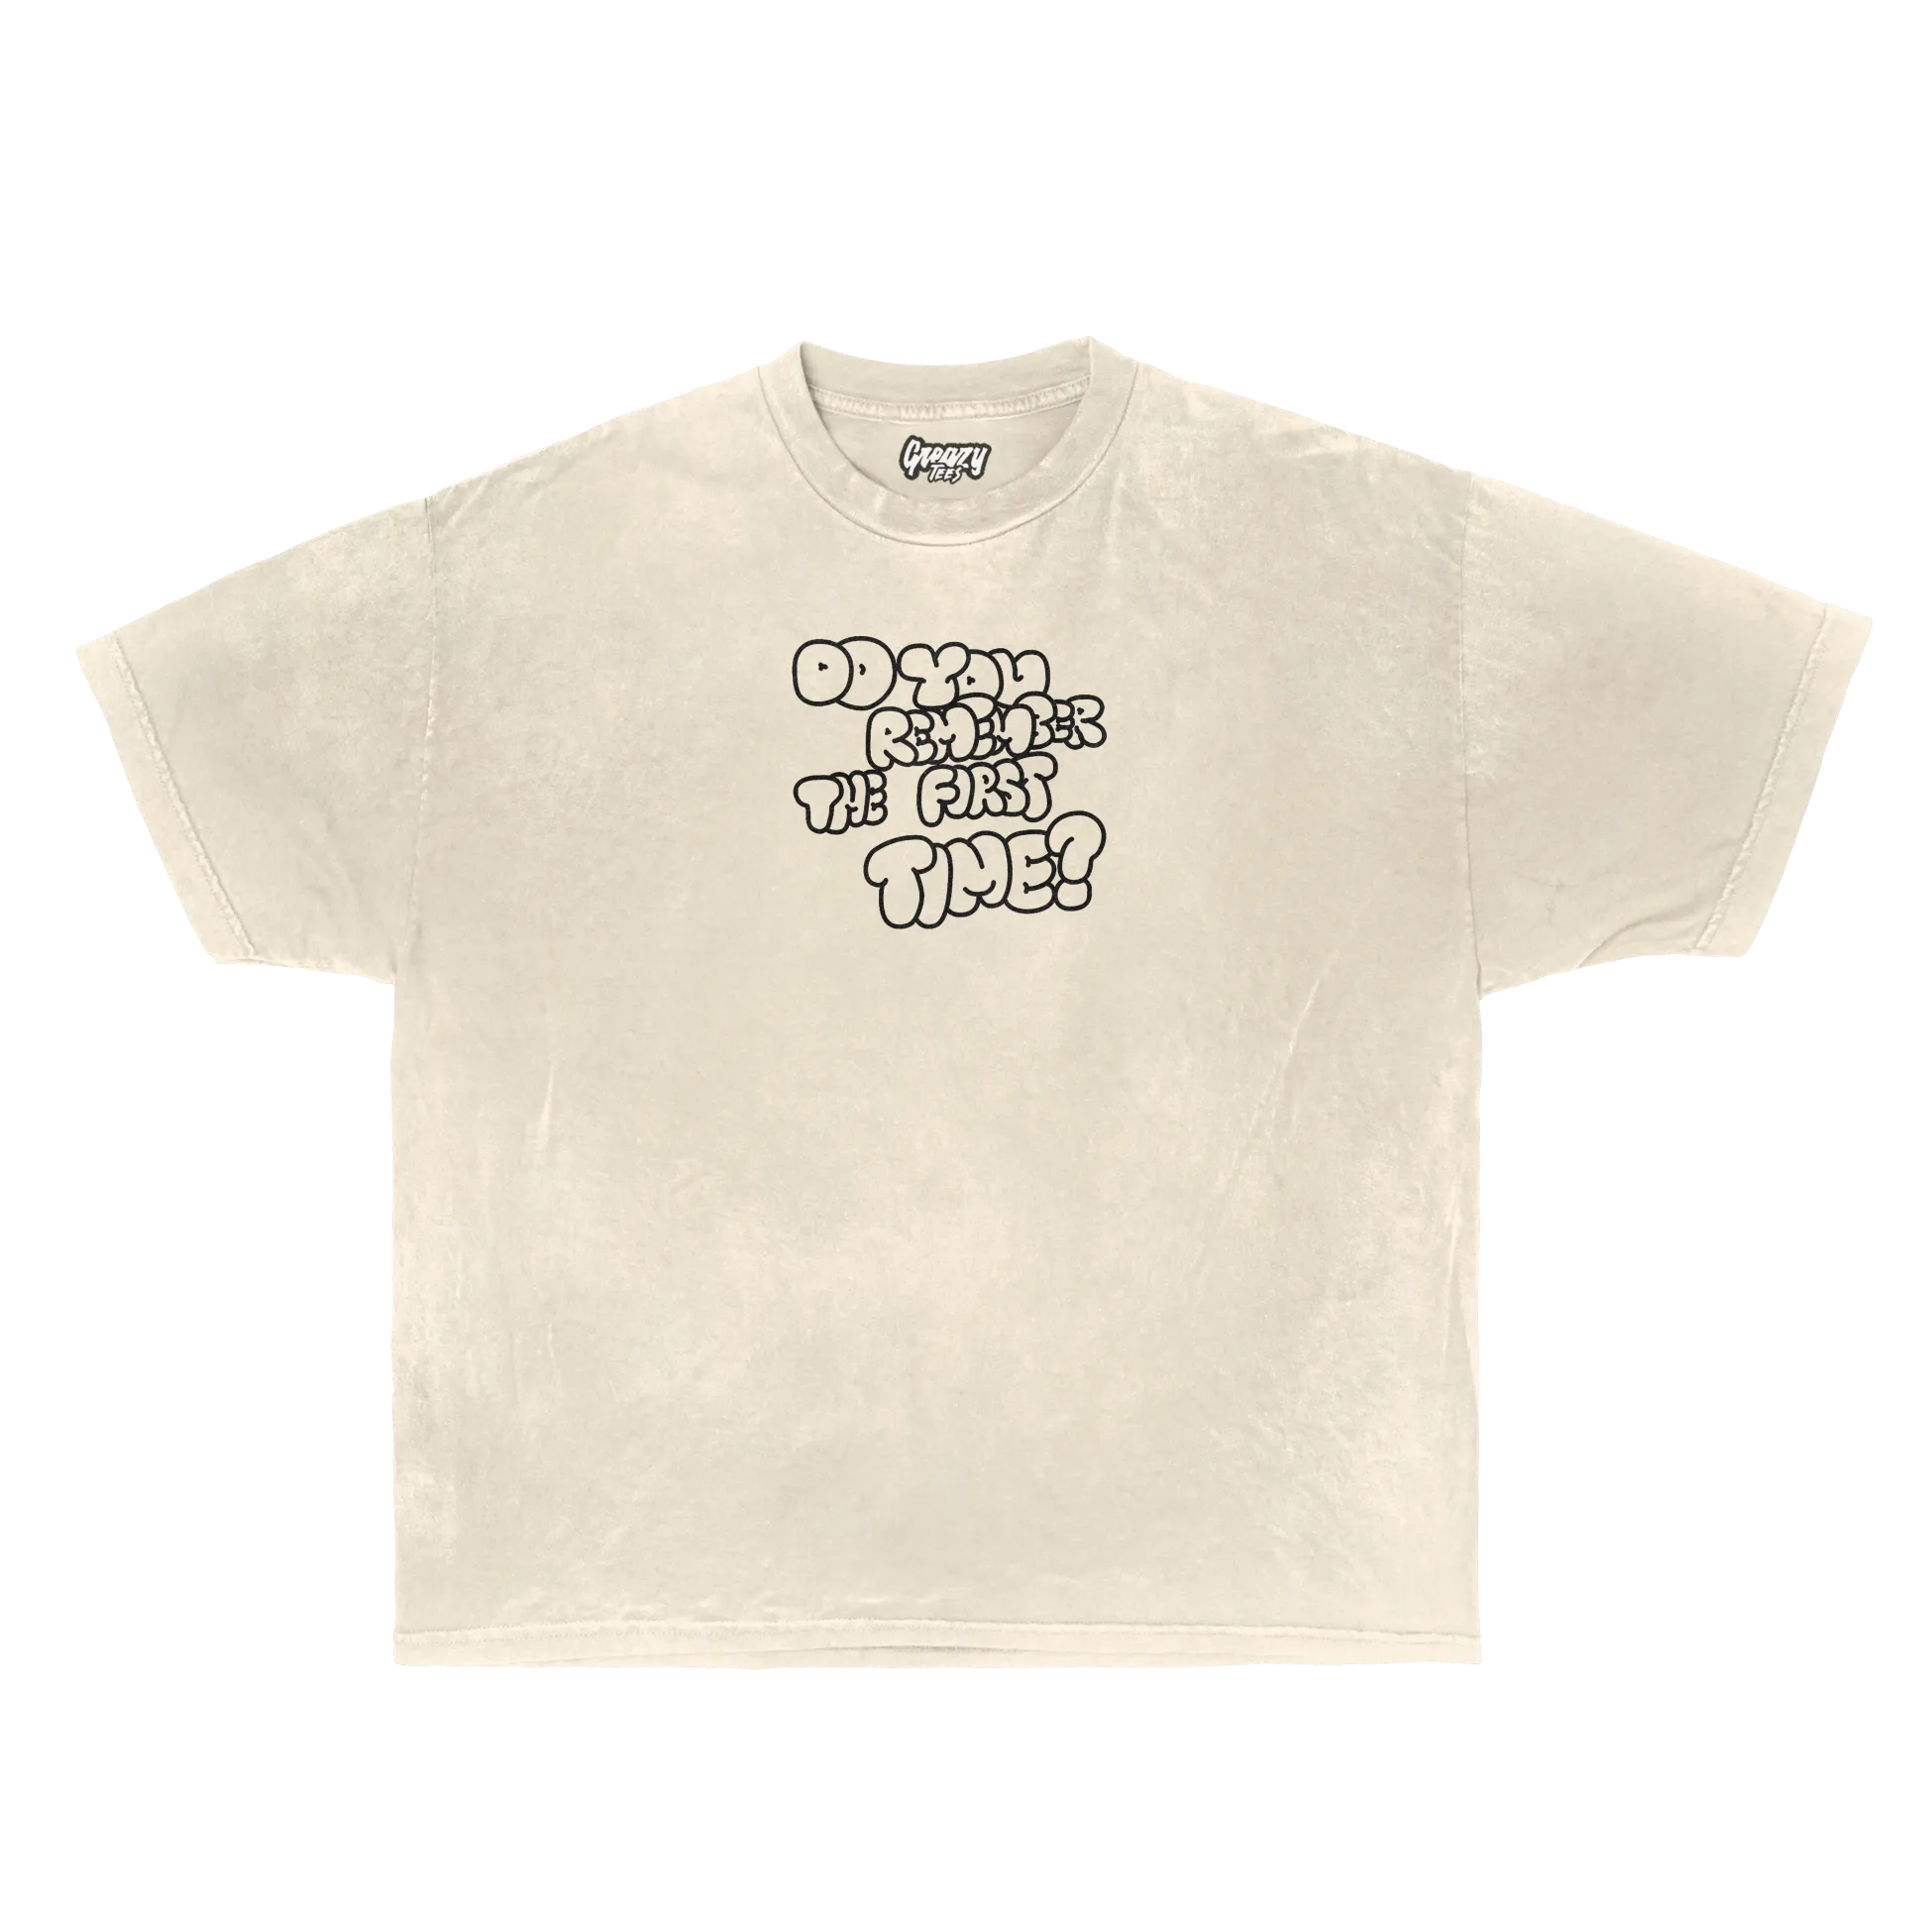 First Time Tee Tee Greazy Tees XS Off White Oversized